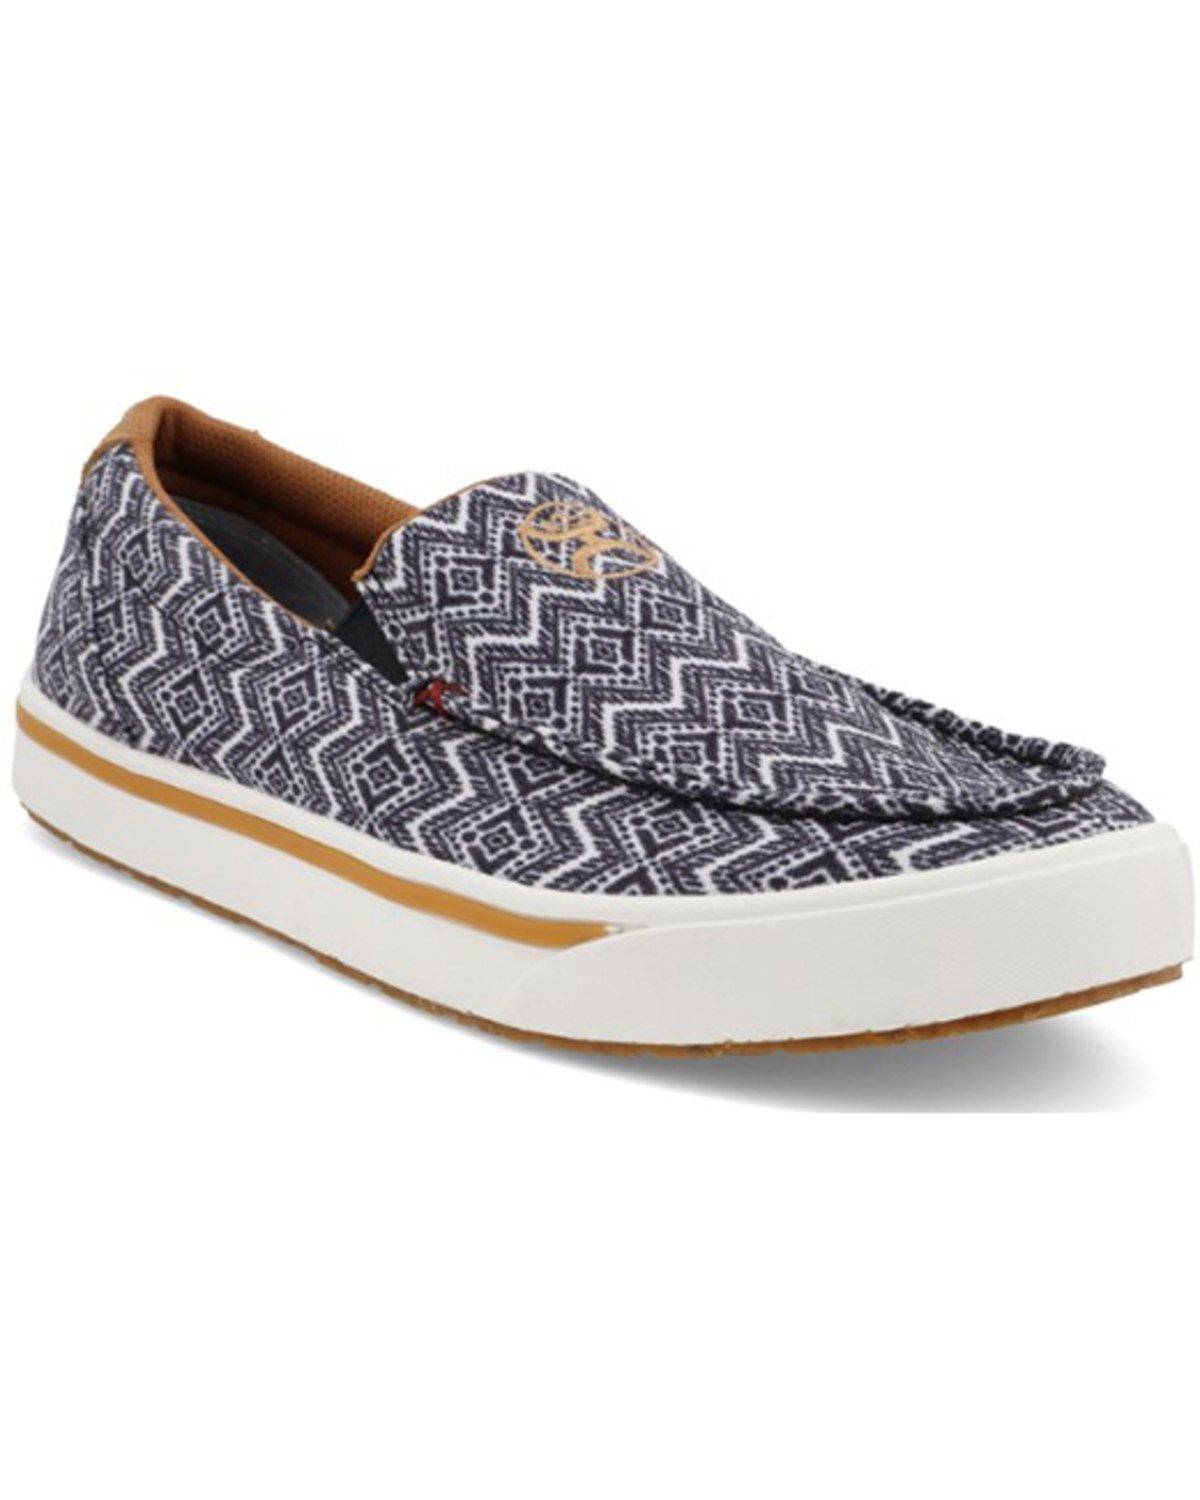 Hooey by Twisted X Men's Slip-On Lopers